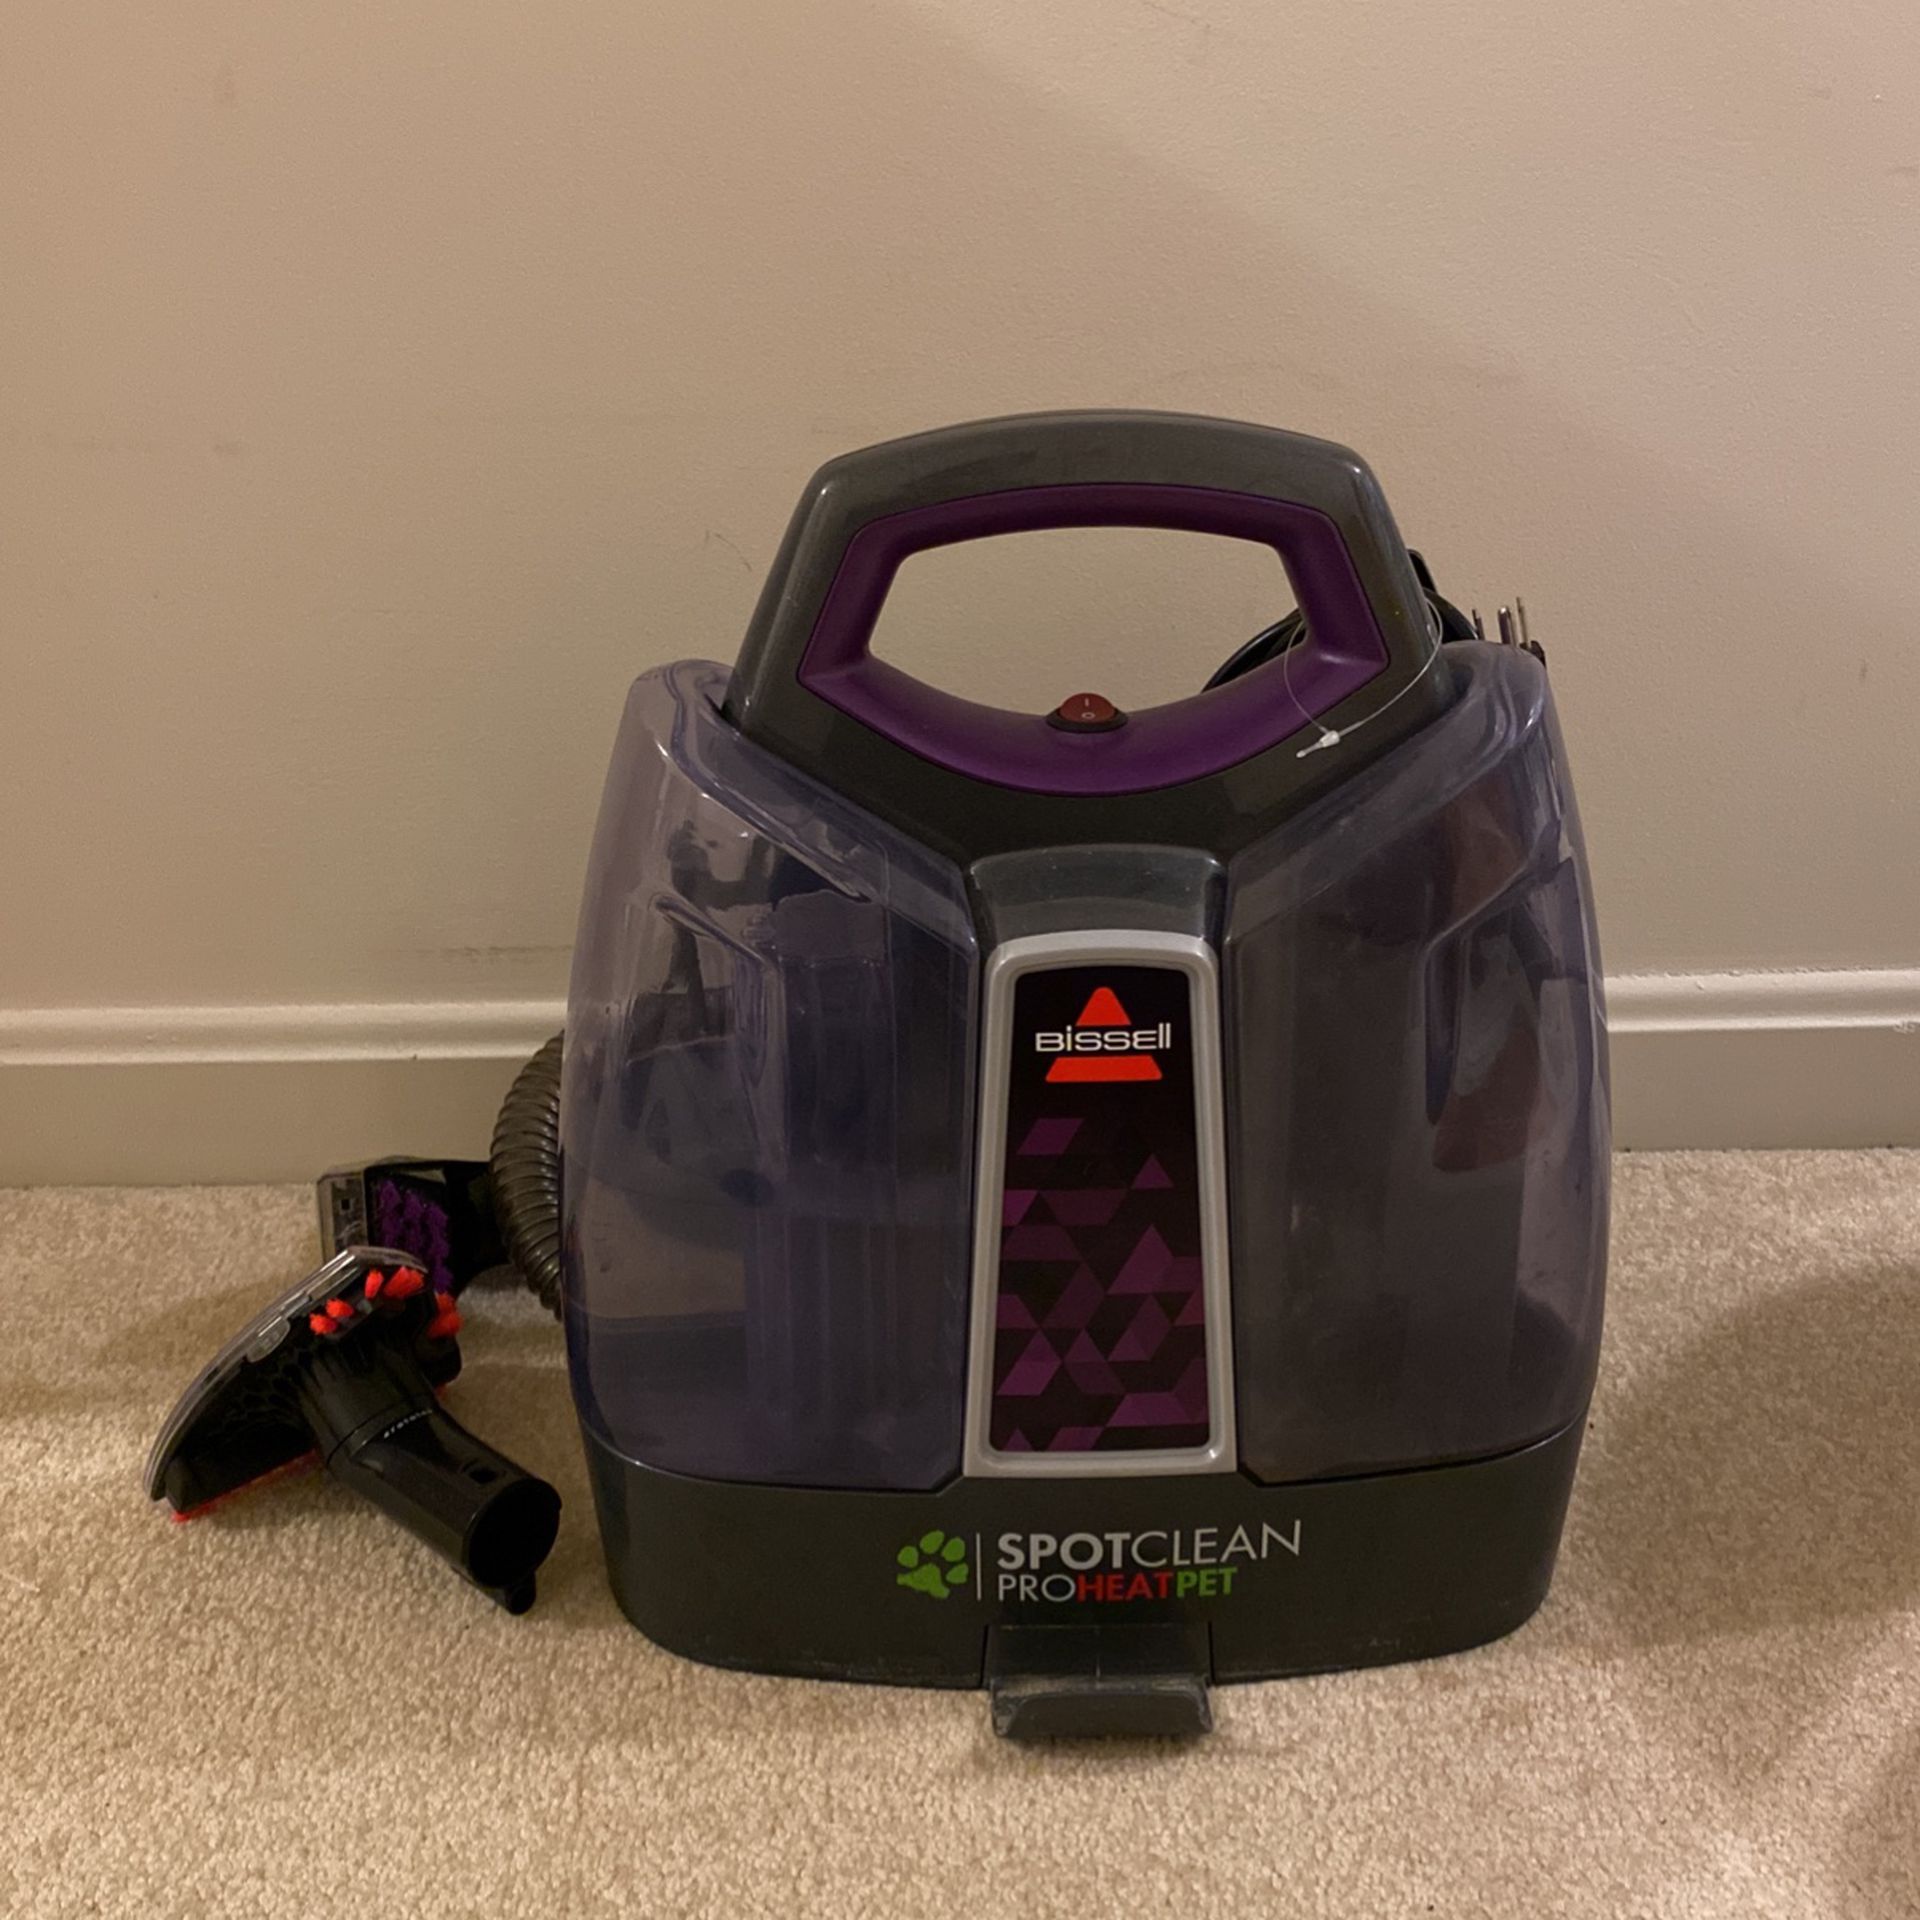 Bissell SpotClean ProHeat Portable Spot and Stain Carpet Cleaner, 2694